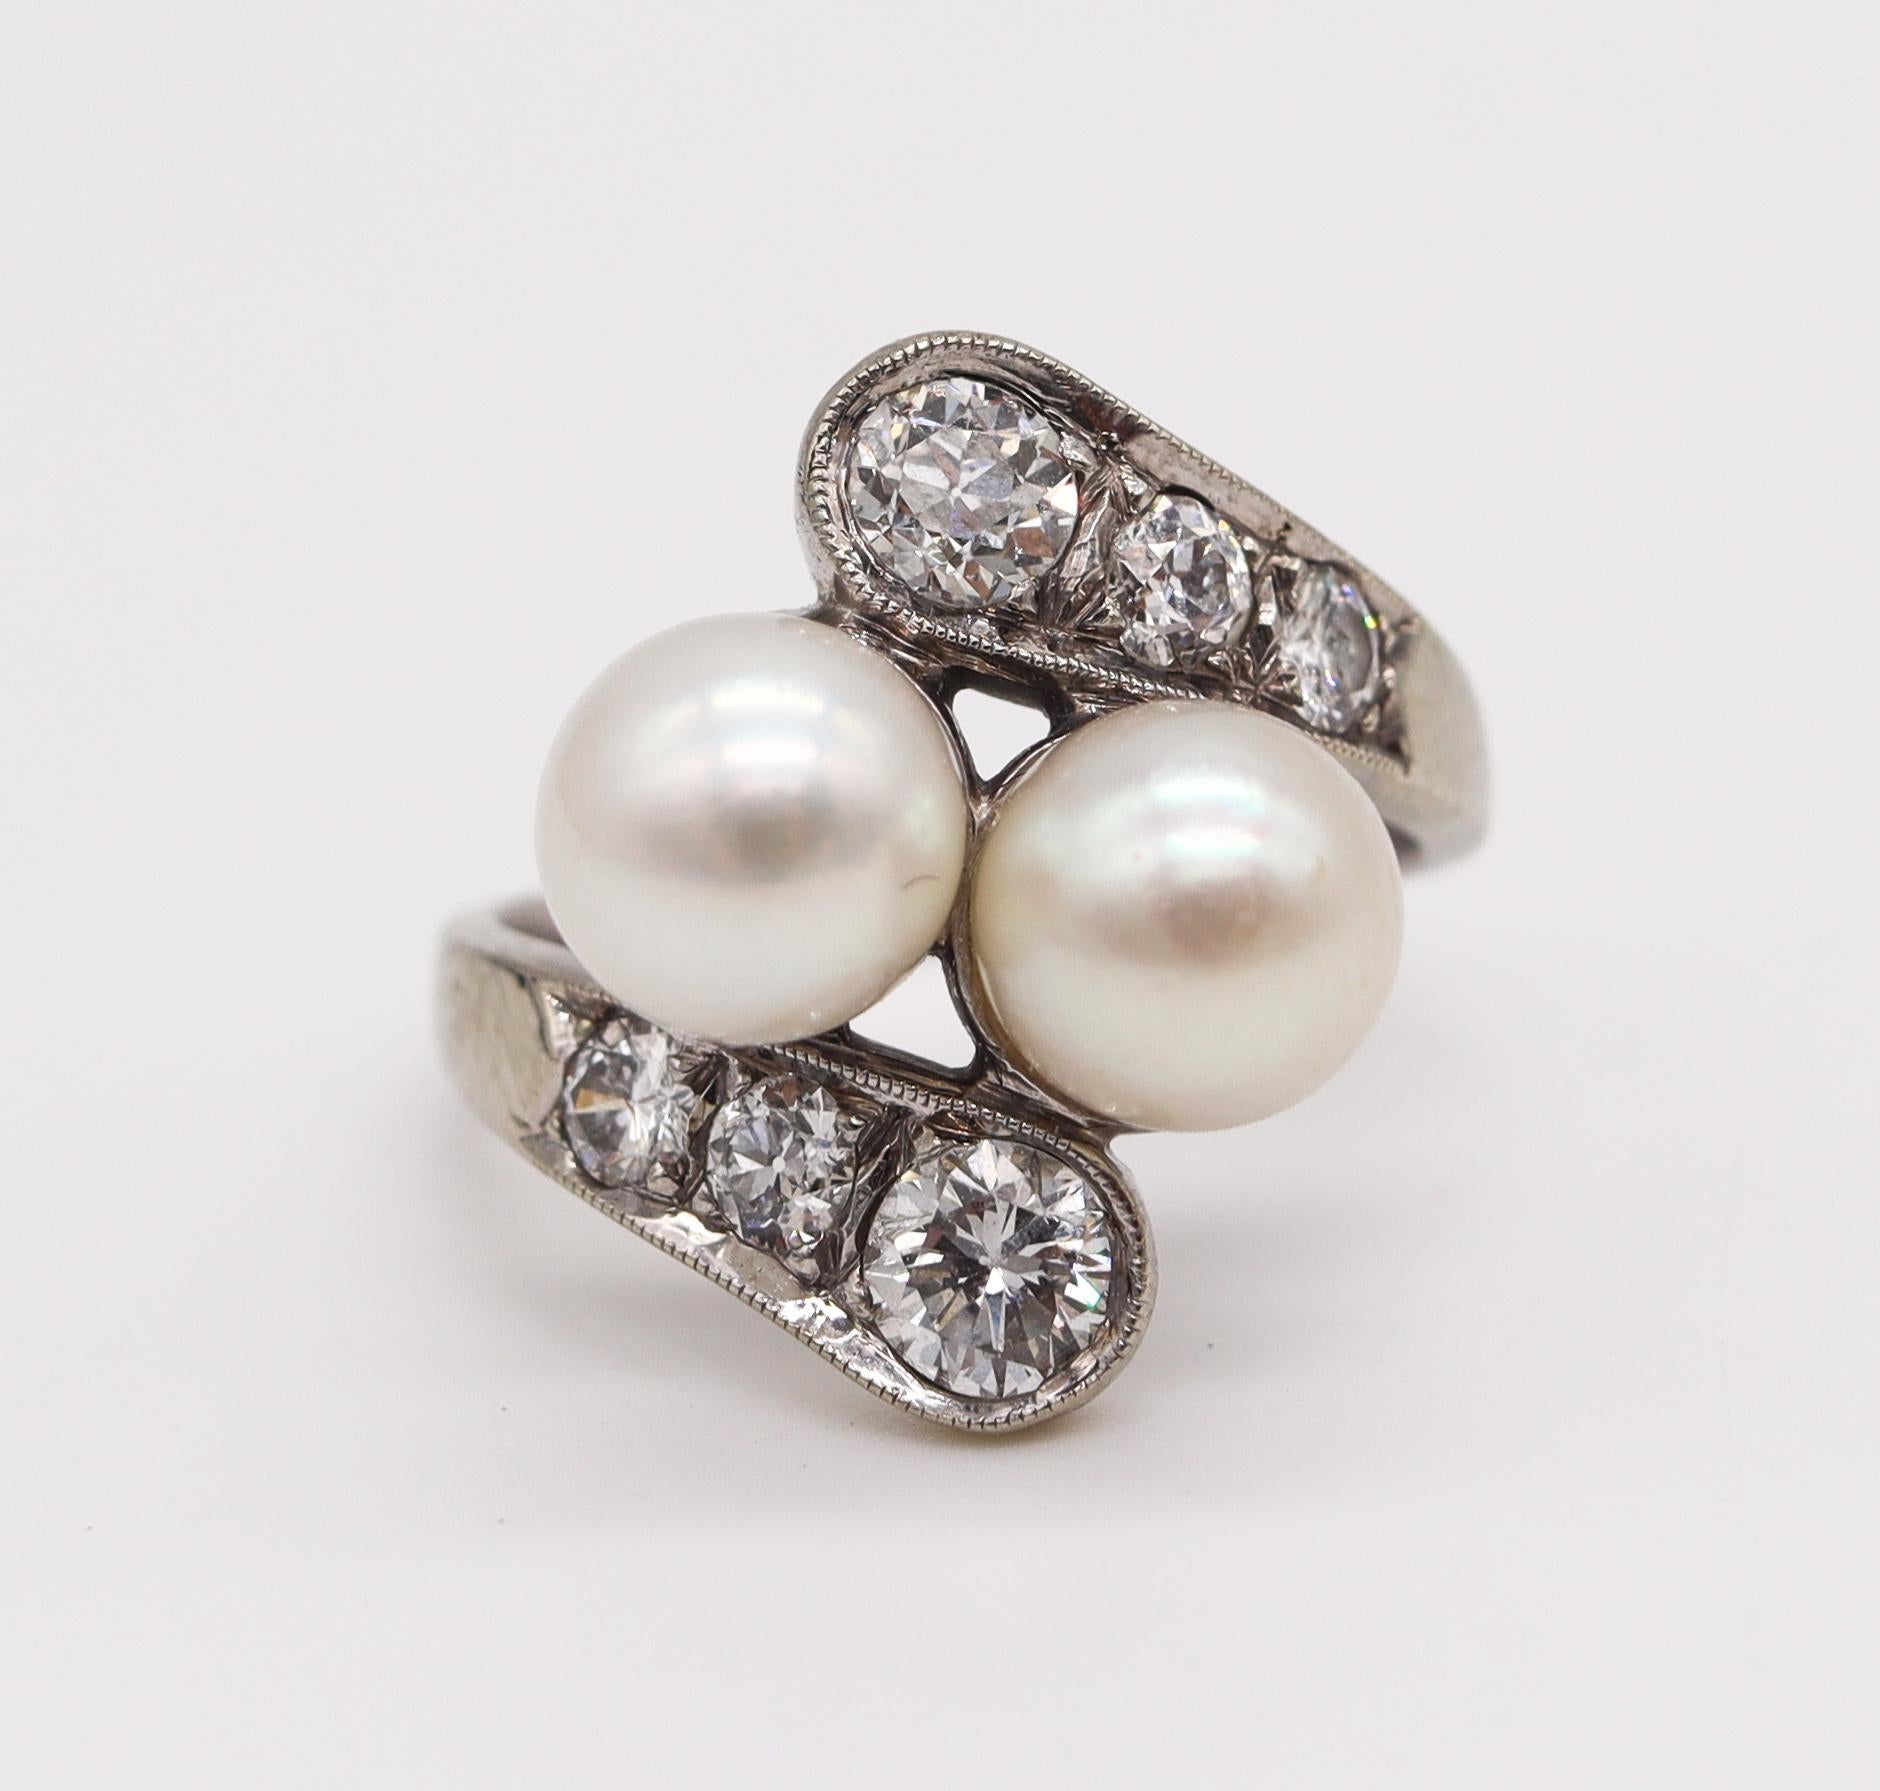 Brilliant Cut Art Deco 1930 Toi Et Moi Pearls Cocktail Ring 14Kt Gold With 1.08 Cts In Diamond